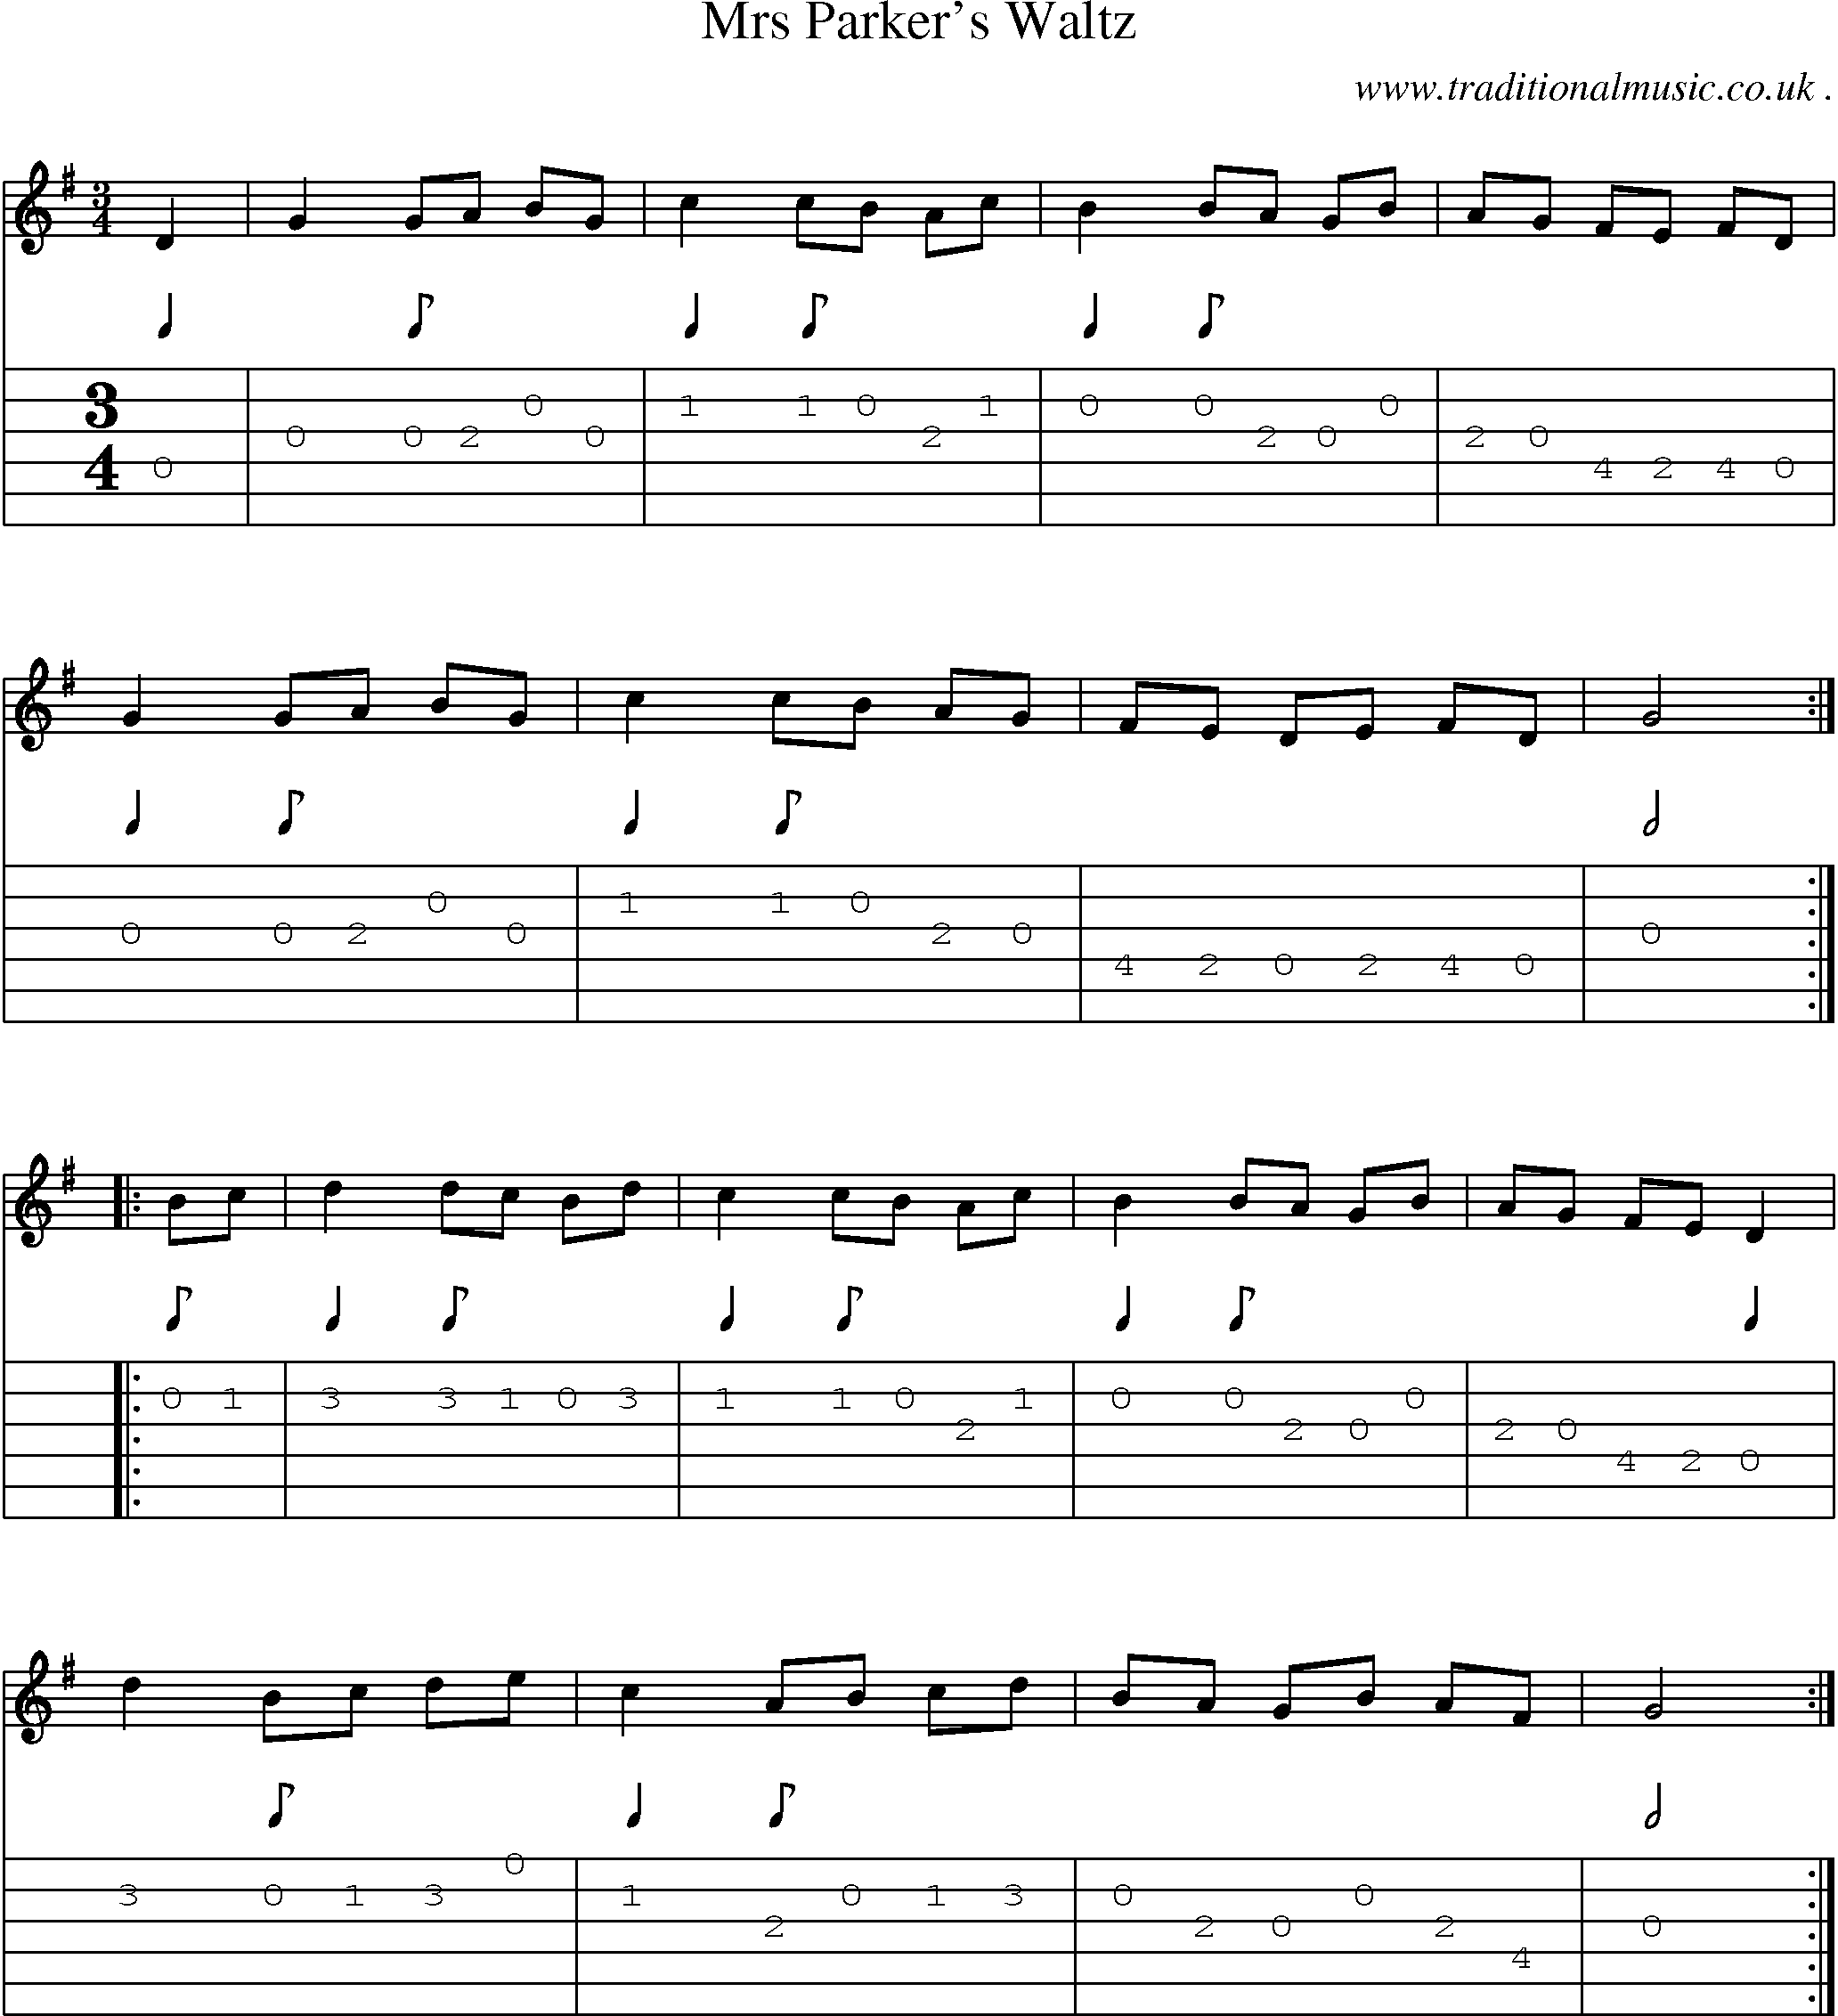 Sheet-Music and Guitar Tabs for Mrs Parkers Waltz